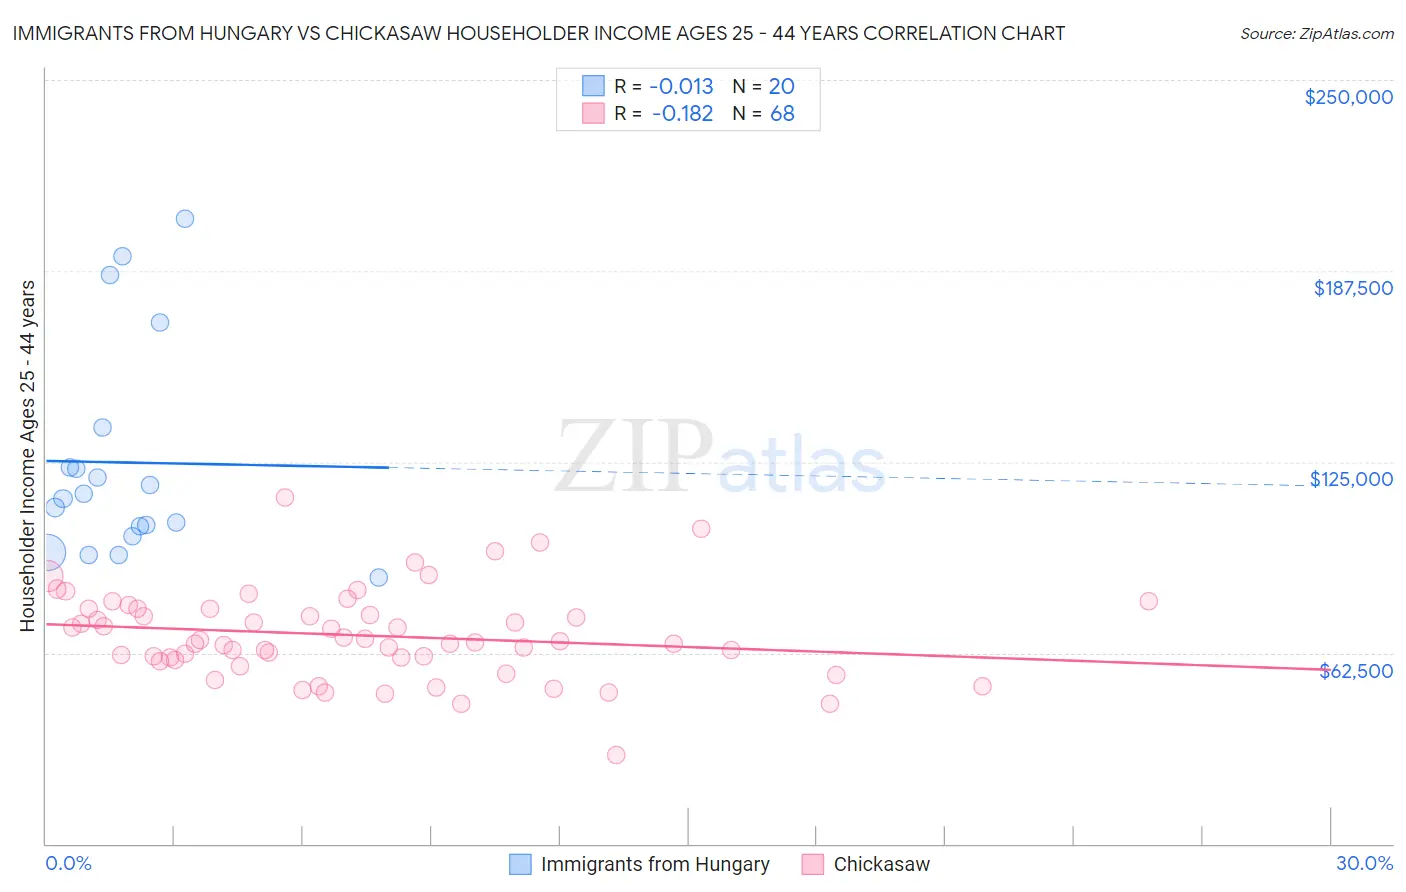 Immigrants from Hungary vs Chickasaw Householder Income Ages 25 - 44 years